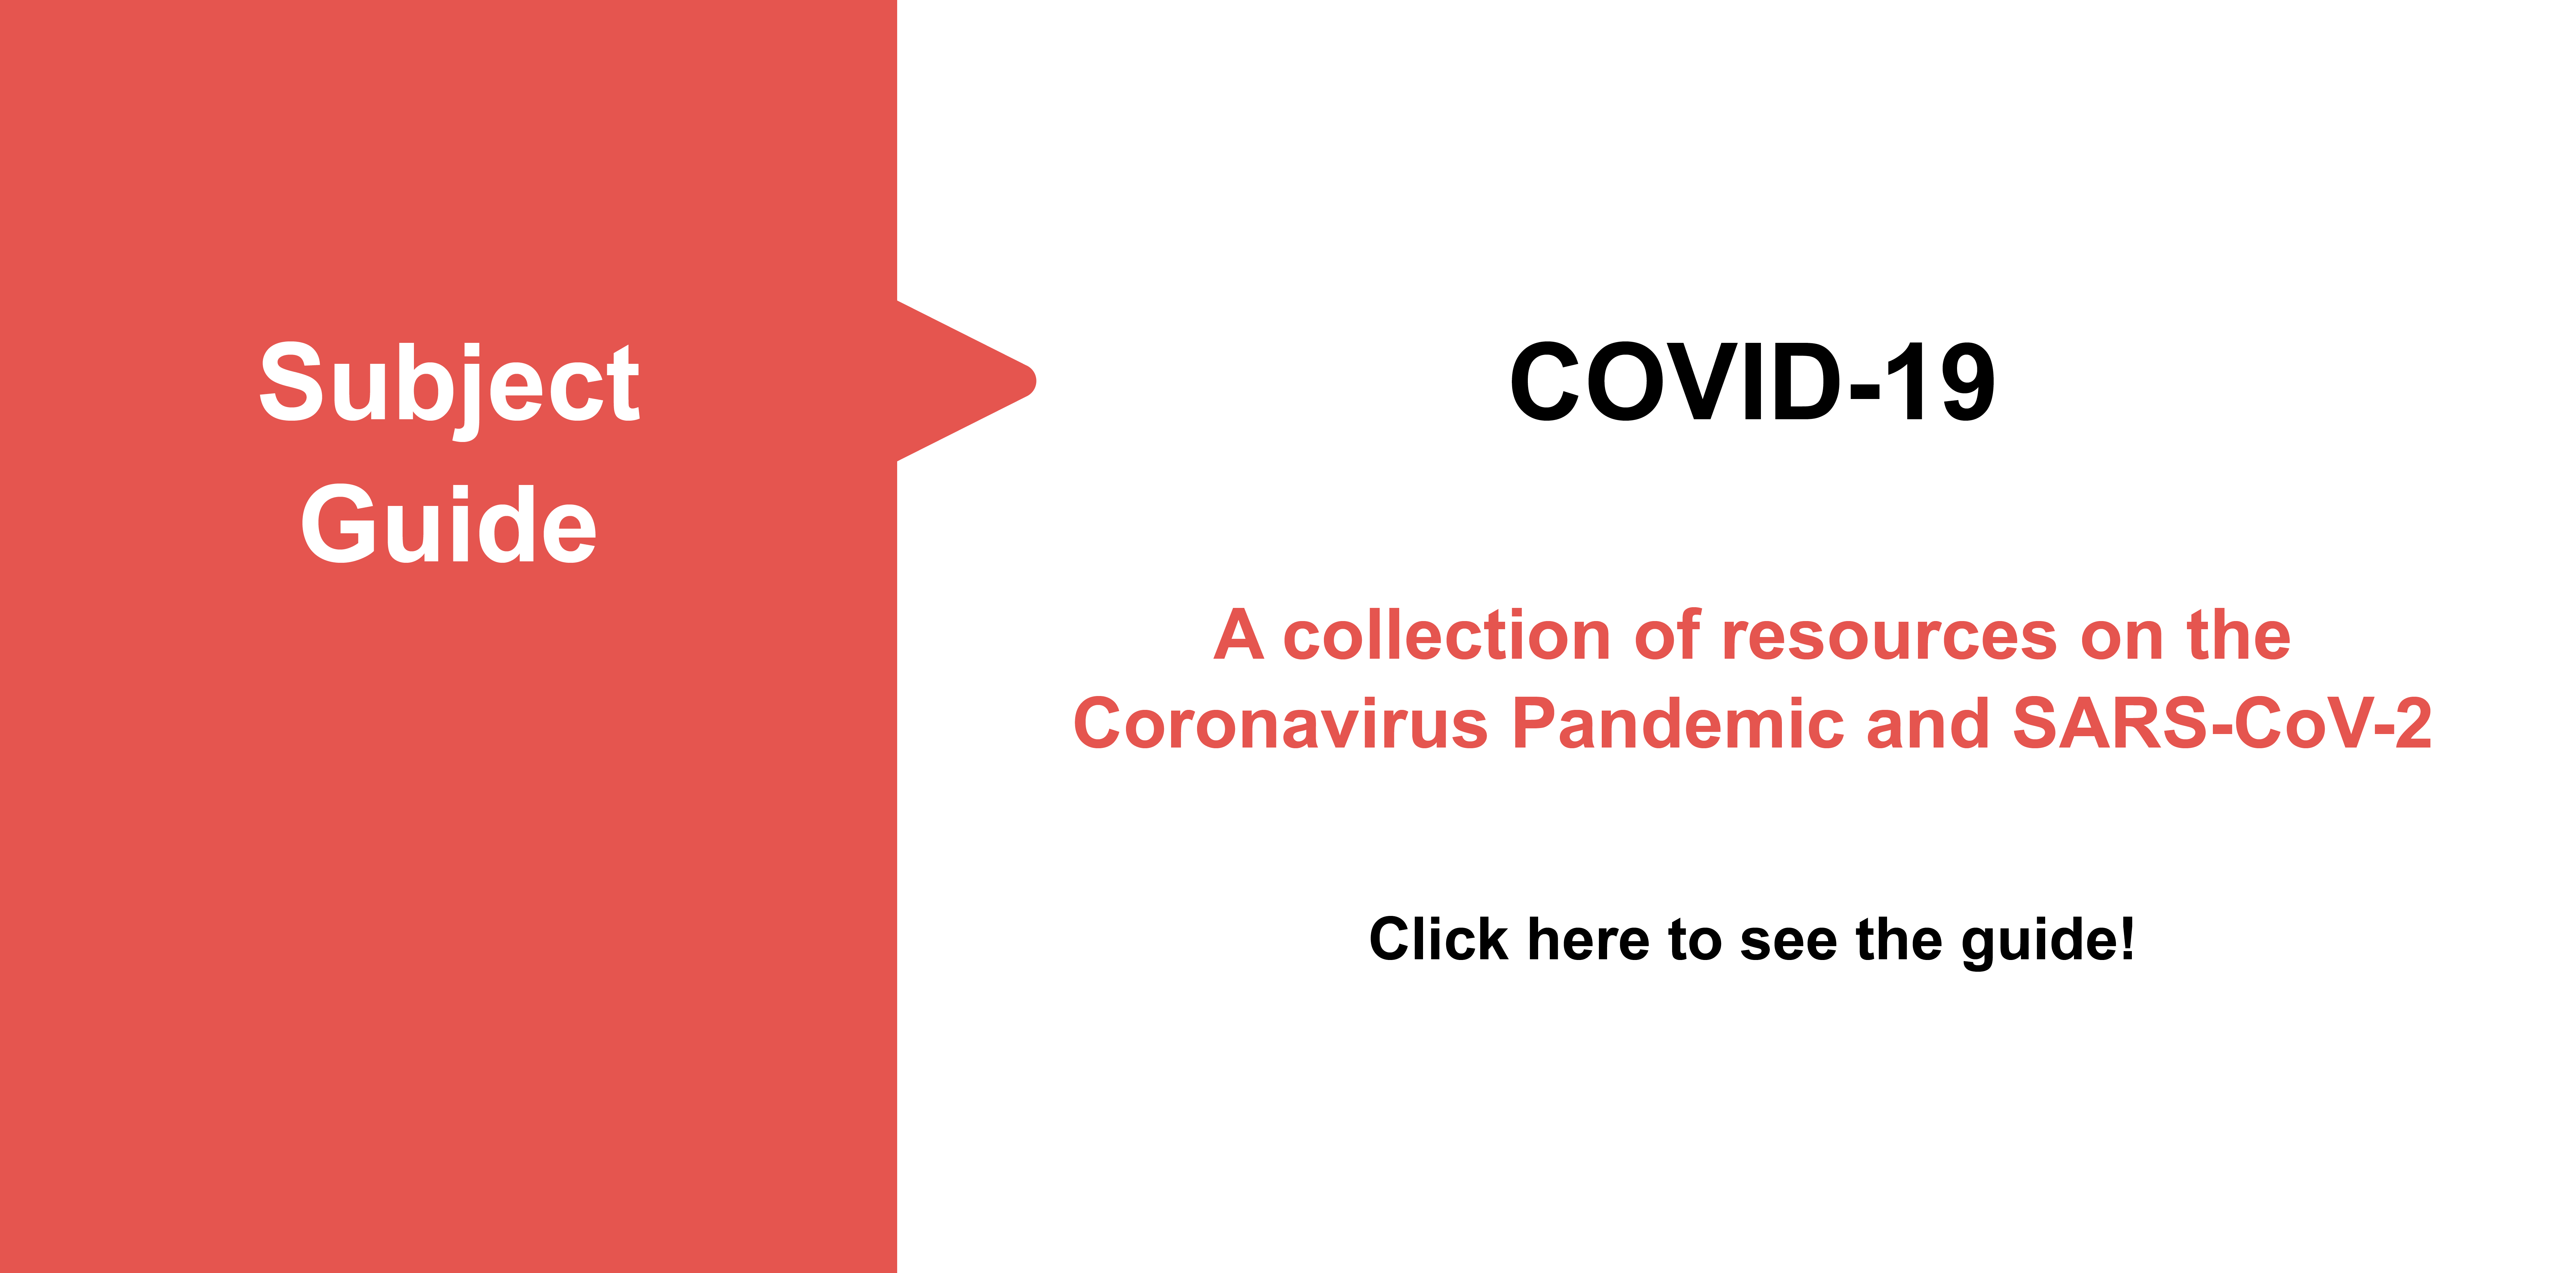 Click for a collection of Covid-19 related resources